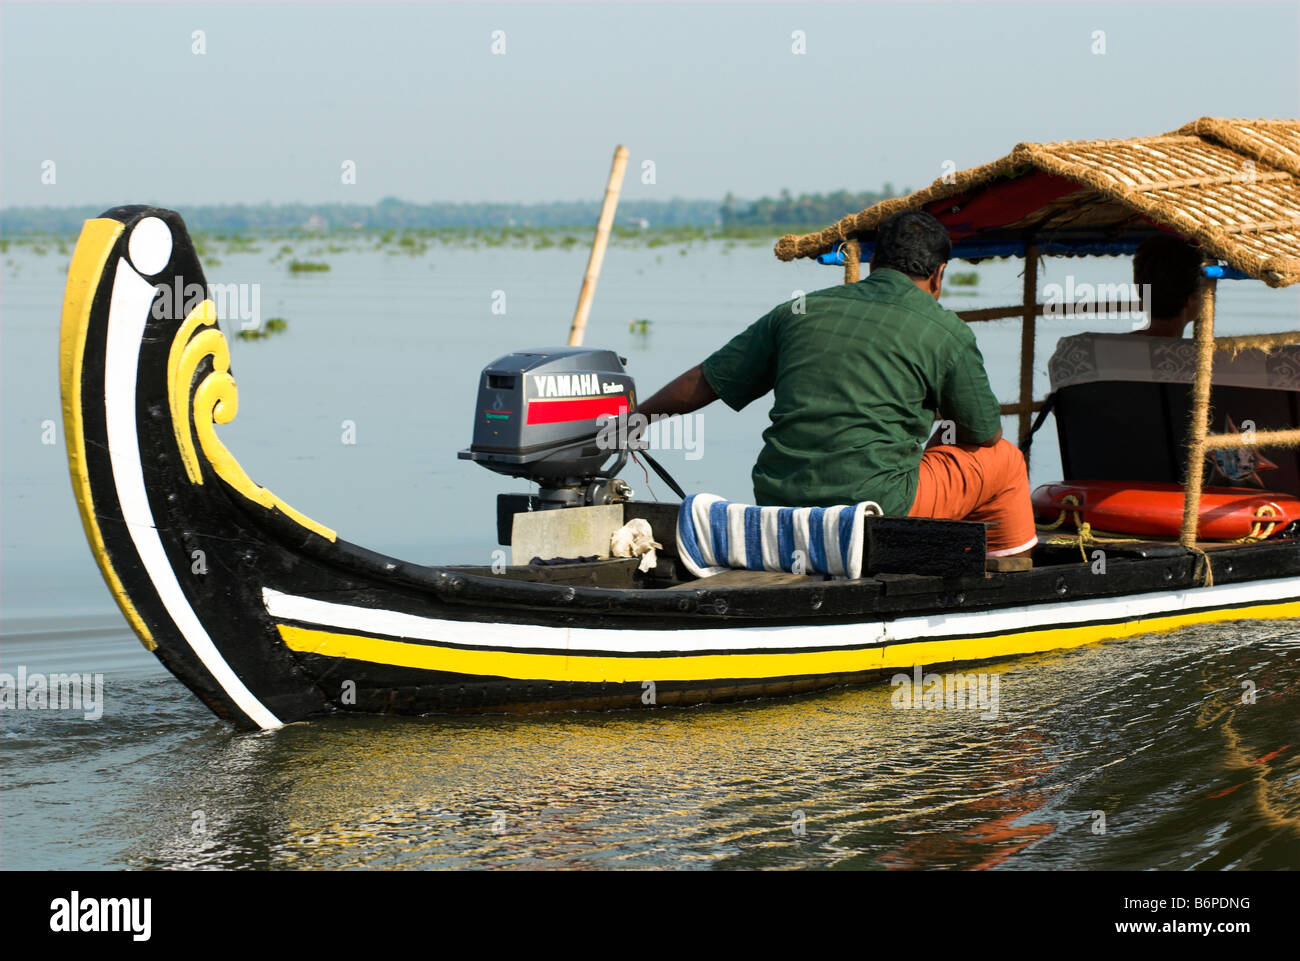 Outboard engine powered traditional boat ferrying passengers on backwaters of Vembanad Lake Kerala India Stock Photo